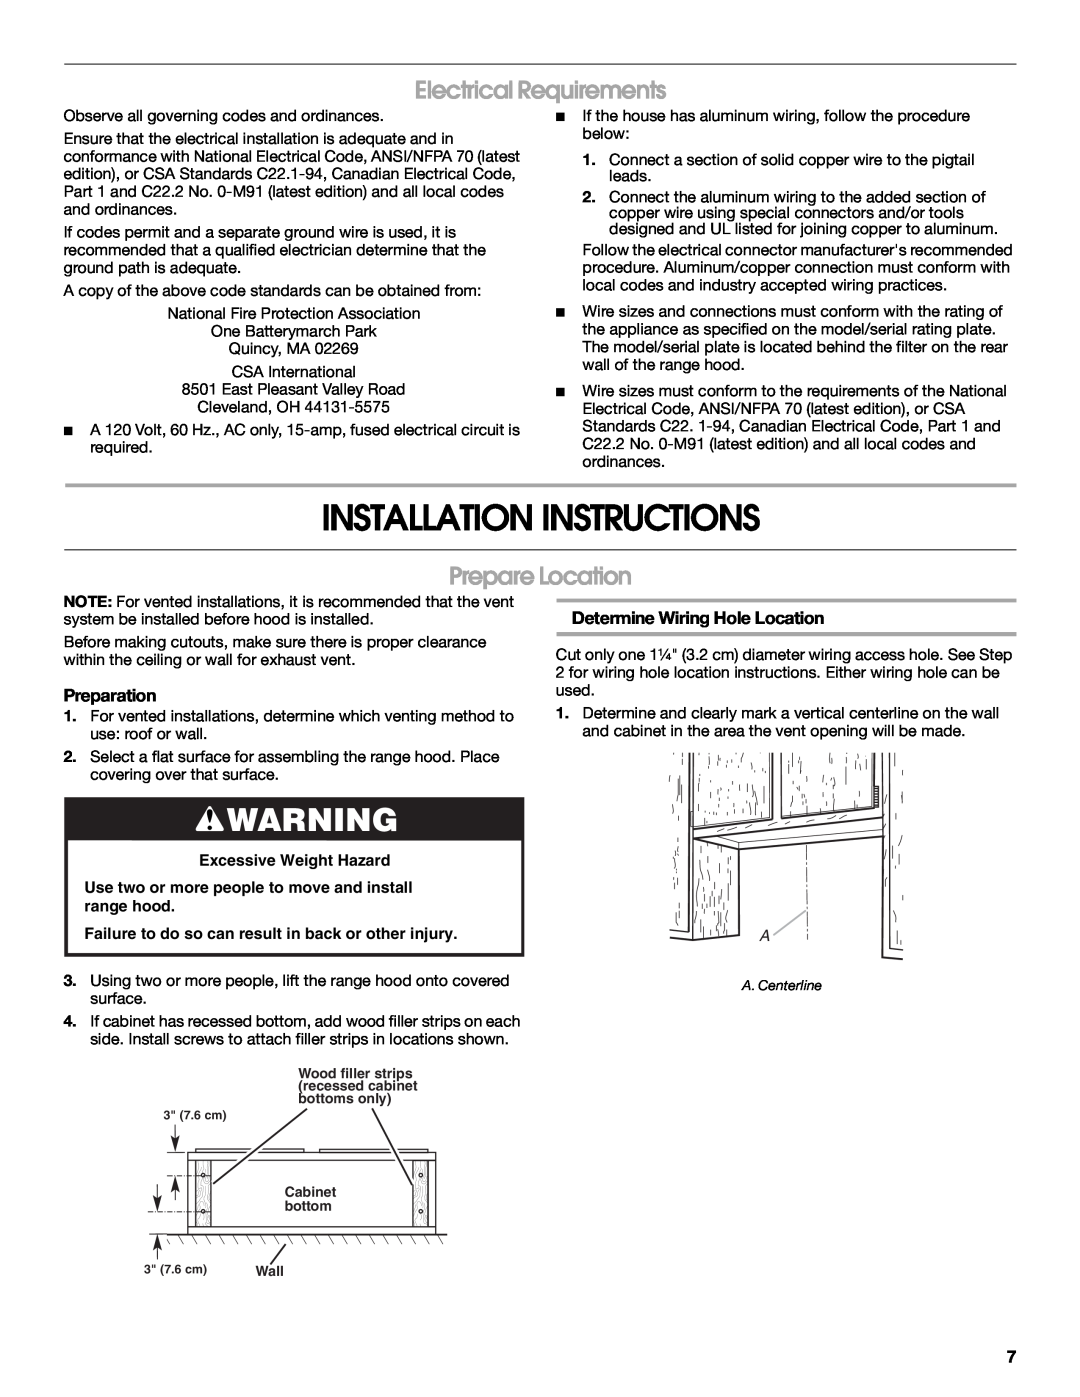 Maytag 99043751D, W10112419D Installation Instructions, Electrical Requirements, Prepare Location, Preparation 